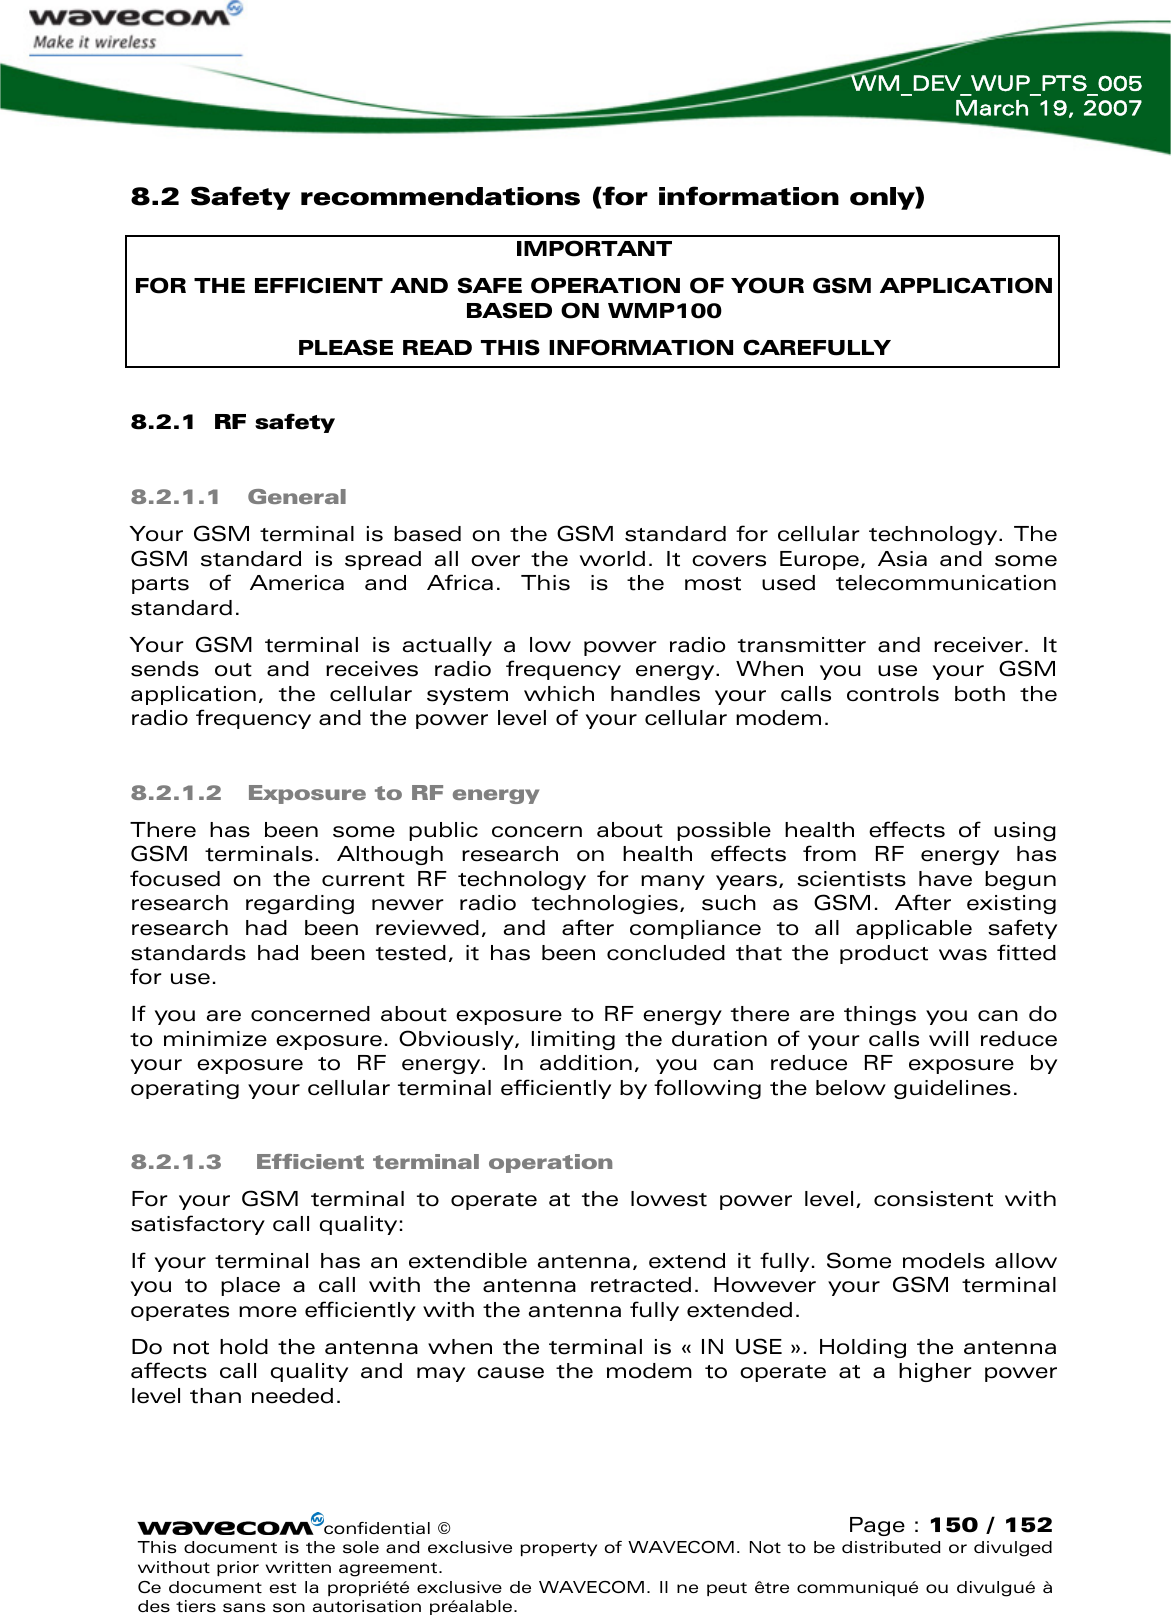   WM_DEV_WUP_PTS_005 March 19, 2007  confidential © Page : 150 / 152 This document is the sole and exclusive property of WAVECOM. Not to be distributed or divulged without prior written agreement.  Ce document est la propriété exclusive de WAVECOM. Il ne peut être communiqué ou divulgué à des tiers sans son autorisation préalable.  8.2 Safety recommendations (for information only) IMPORTANT FOR THE EFFICIENT AND SAFE OPERATION OF YOUR GSM APPLICATION BASED ON WMP100  PLEASE READ THIS INFORMATION CAREFULLY 8.2.1  RF safety 8.2.1.1 General Your GSM terminal is based on the GSM standard for cellular technology. The GSM standard is spread all over the world. It covers Europe, Asia and some parts of America and Africa. This is the most used telecommunication standard. Your GSM terminal is actually a low power radio transmitter and receiver. It sends out and receives radio frequency energy. When you use your GSM application, the cellular system which handles your calls controls both the radio frequency and the power level of your cellular modem. 8.2.1.2 Exposure to RF energy There has been some public concern about possible health effects of using GSM terminals. Although research on health effects from RF energy has focused on the current RF technology for many years, scientists have begun research regarding newer radio technologies, such as GSM. After existing research had been reviewed, and after compliance to all applicable safety standards had been tested, it has been concluded that the product was fitted for use. If you are concerned about exposure to RF energy there are things you can do to minimize exposure. Obviously, limiting the duration of your calls will reduce your exposure to RF energy. In addition, you can reduce RF exposure by operating your cellular terminal efficiently by following the below guidelines. 8.2.1.3  Efficient terminal operation For your GSM terminal to operate at the lowest power level, consistent with satisfactory call quality: If your terminal has an extendible antenna, extend it fully. Some models allow you to place a call with the antenna retracted. However your GSM terminal operates more efficiently with the antenna fully extended. Do not hold the antenna when the terminal is « IN USE ». Holding the antenna affects call quality and may cause the modem to operate at a higher power level than needed. 